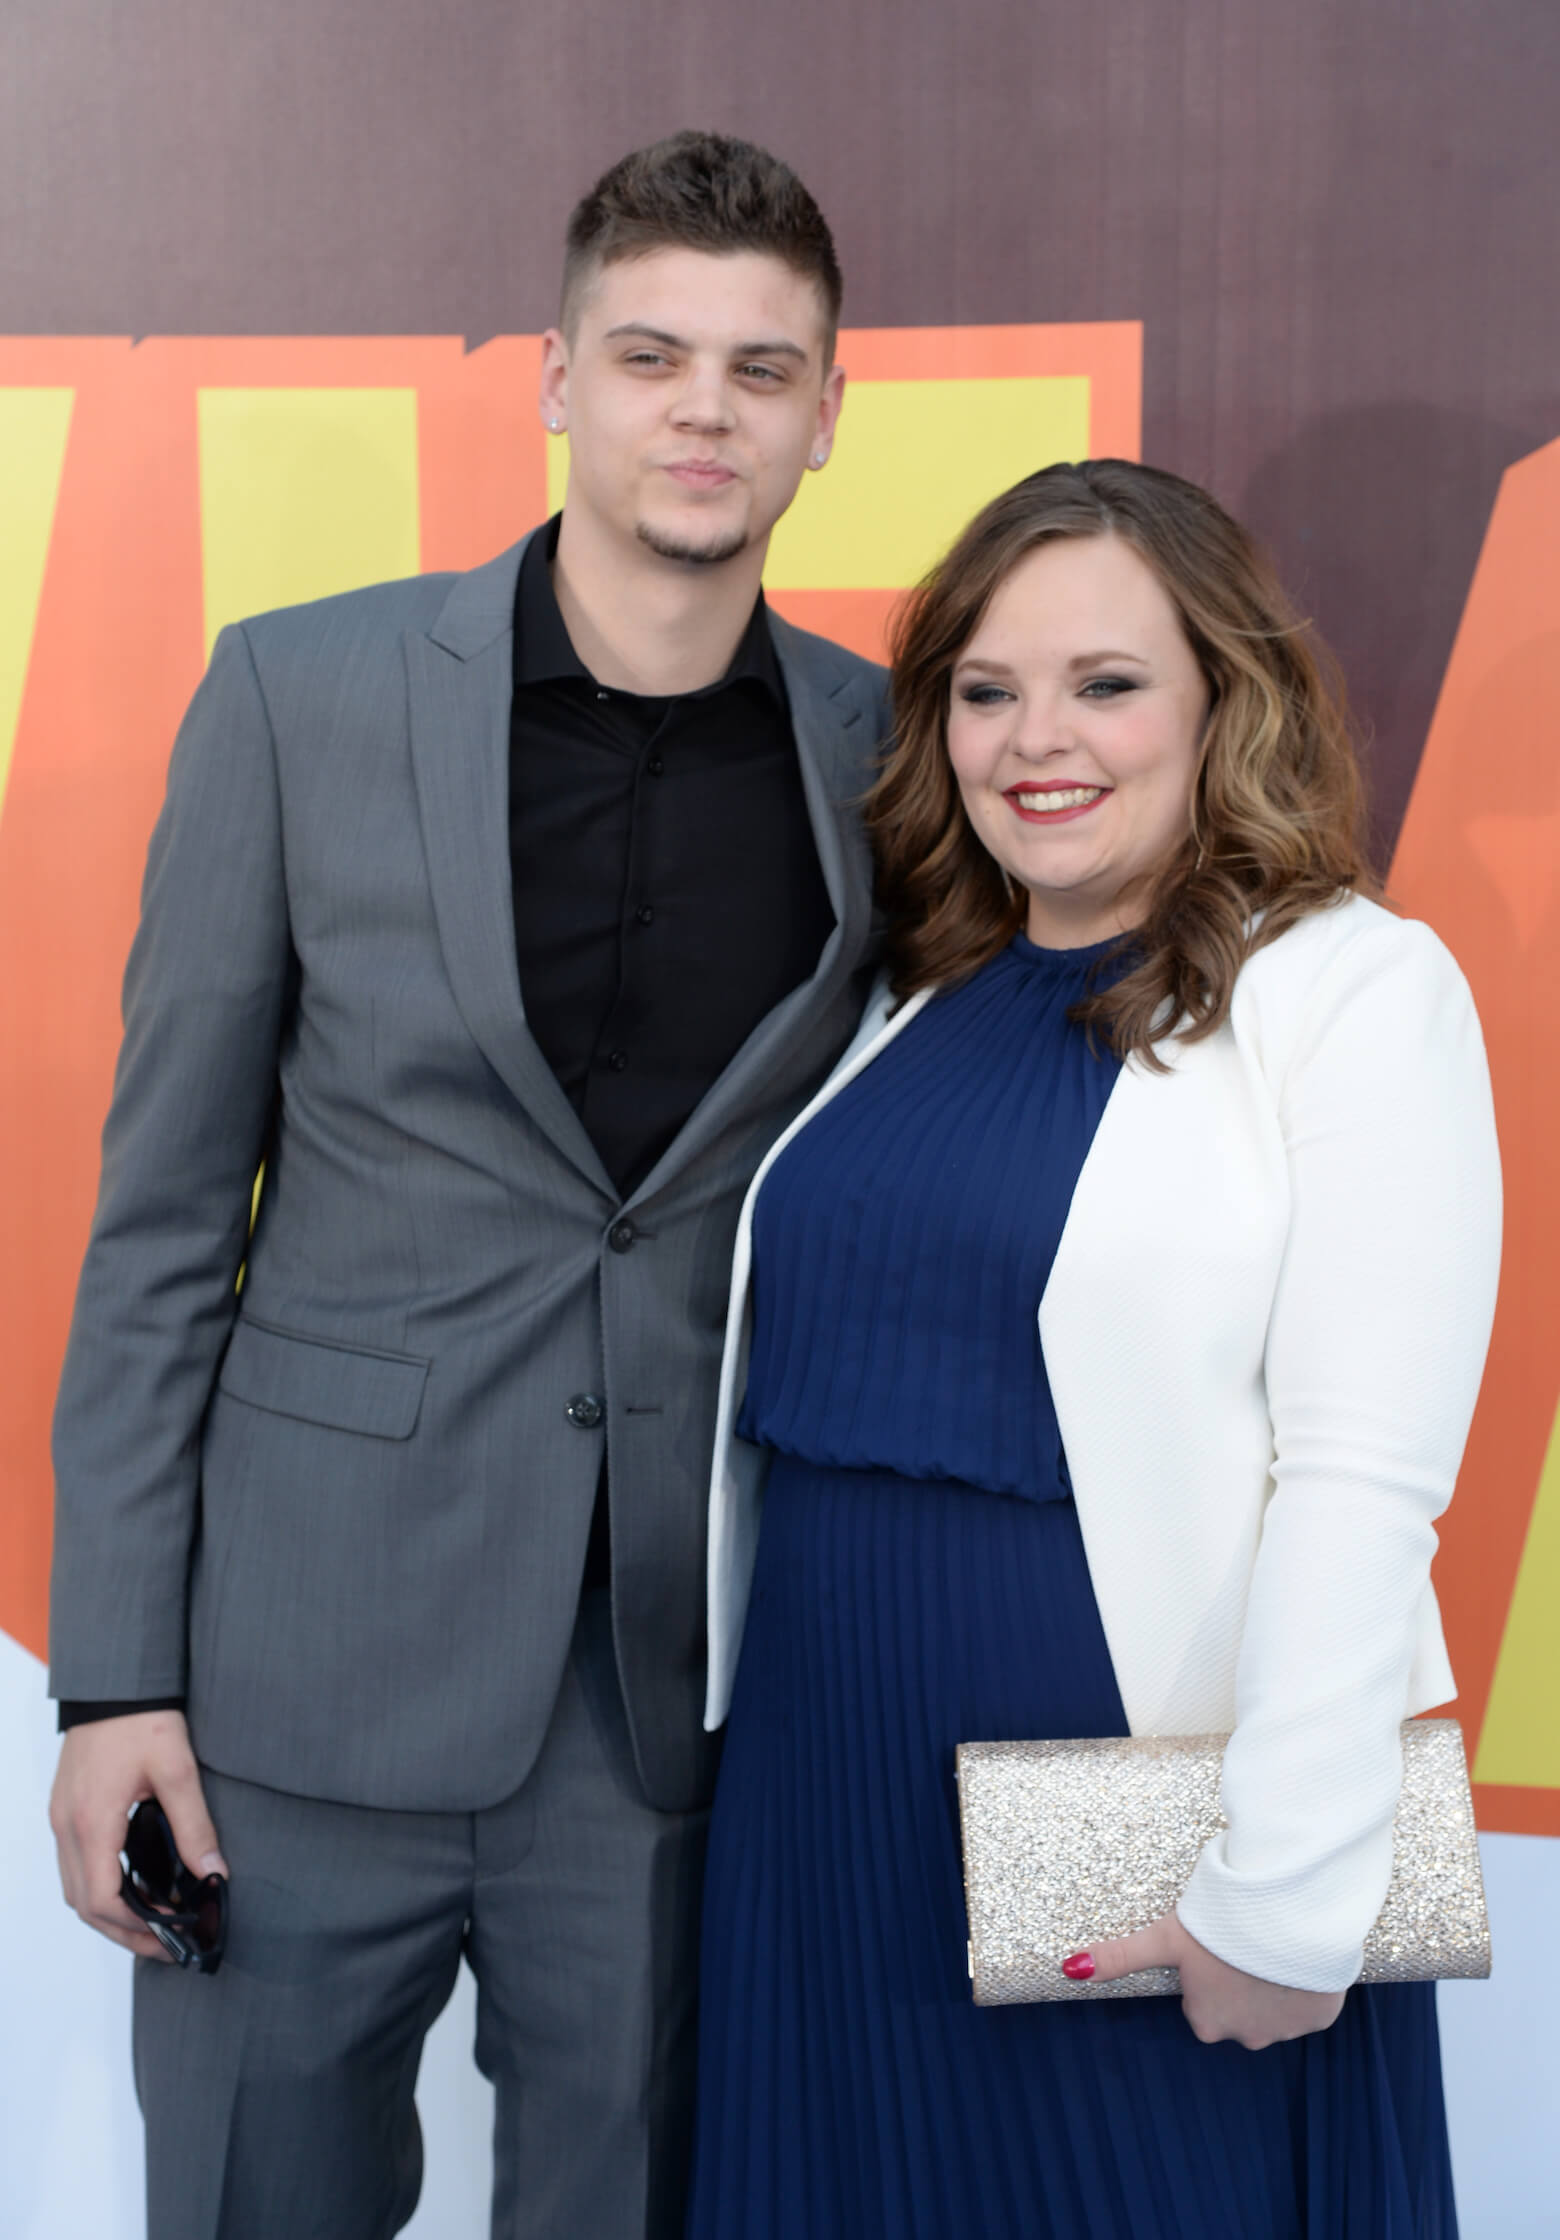 'Teen Mom' stars Tyler Baltierra and Catelynn Lowell standing next to each other at an event